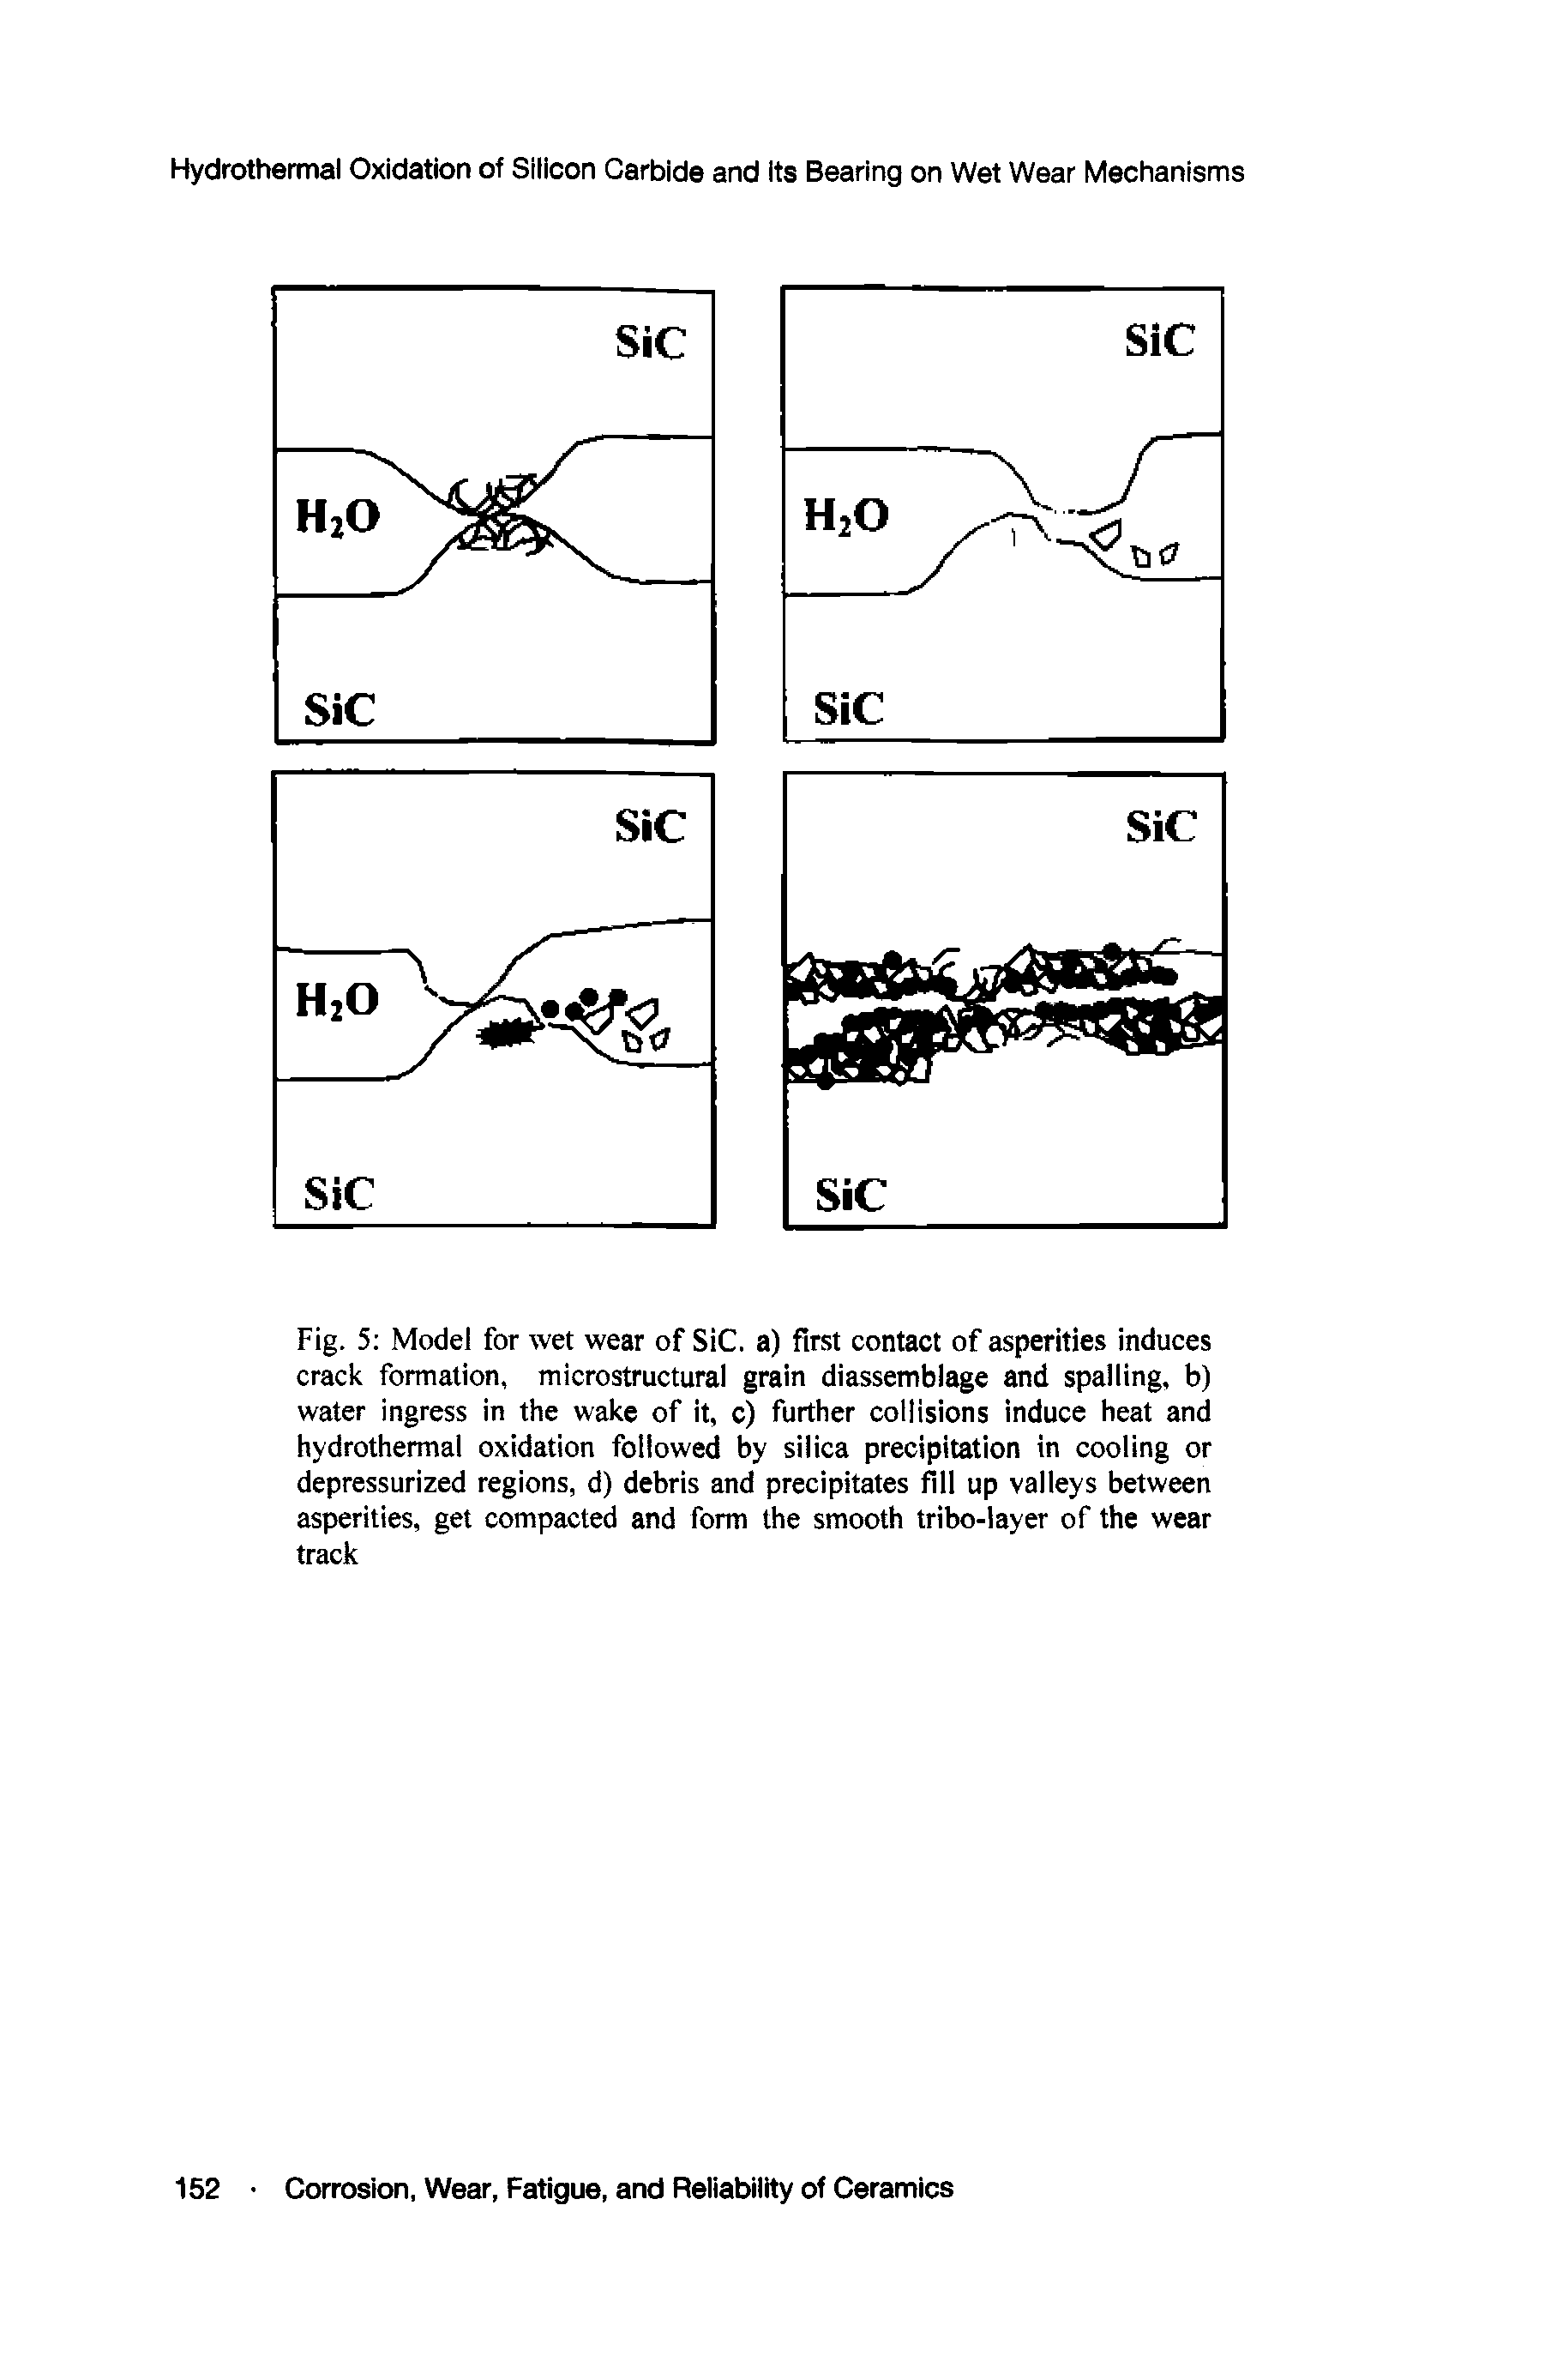 Fig. 5 Model for wet wear of SiC. a) first contact of asperities induces crack formation, microstructural grain diassemblage and spalling, b) water ingress in the wake of it, c) further collisions induce heat and hydrothermal oxidation followed by silica precipitation in cooling or depressurized regions, d) debris and precipitates fill up valleys between asperities, get compacted and form the smooth tribo-layer of the wear track...